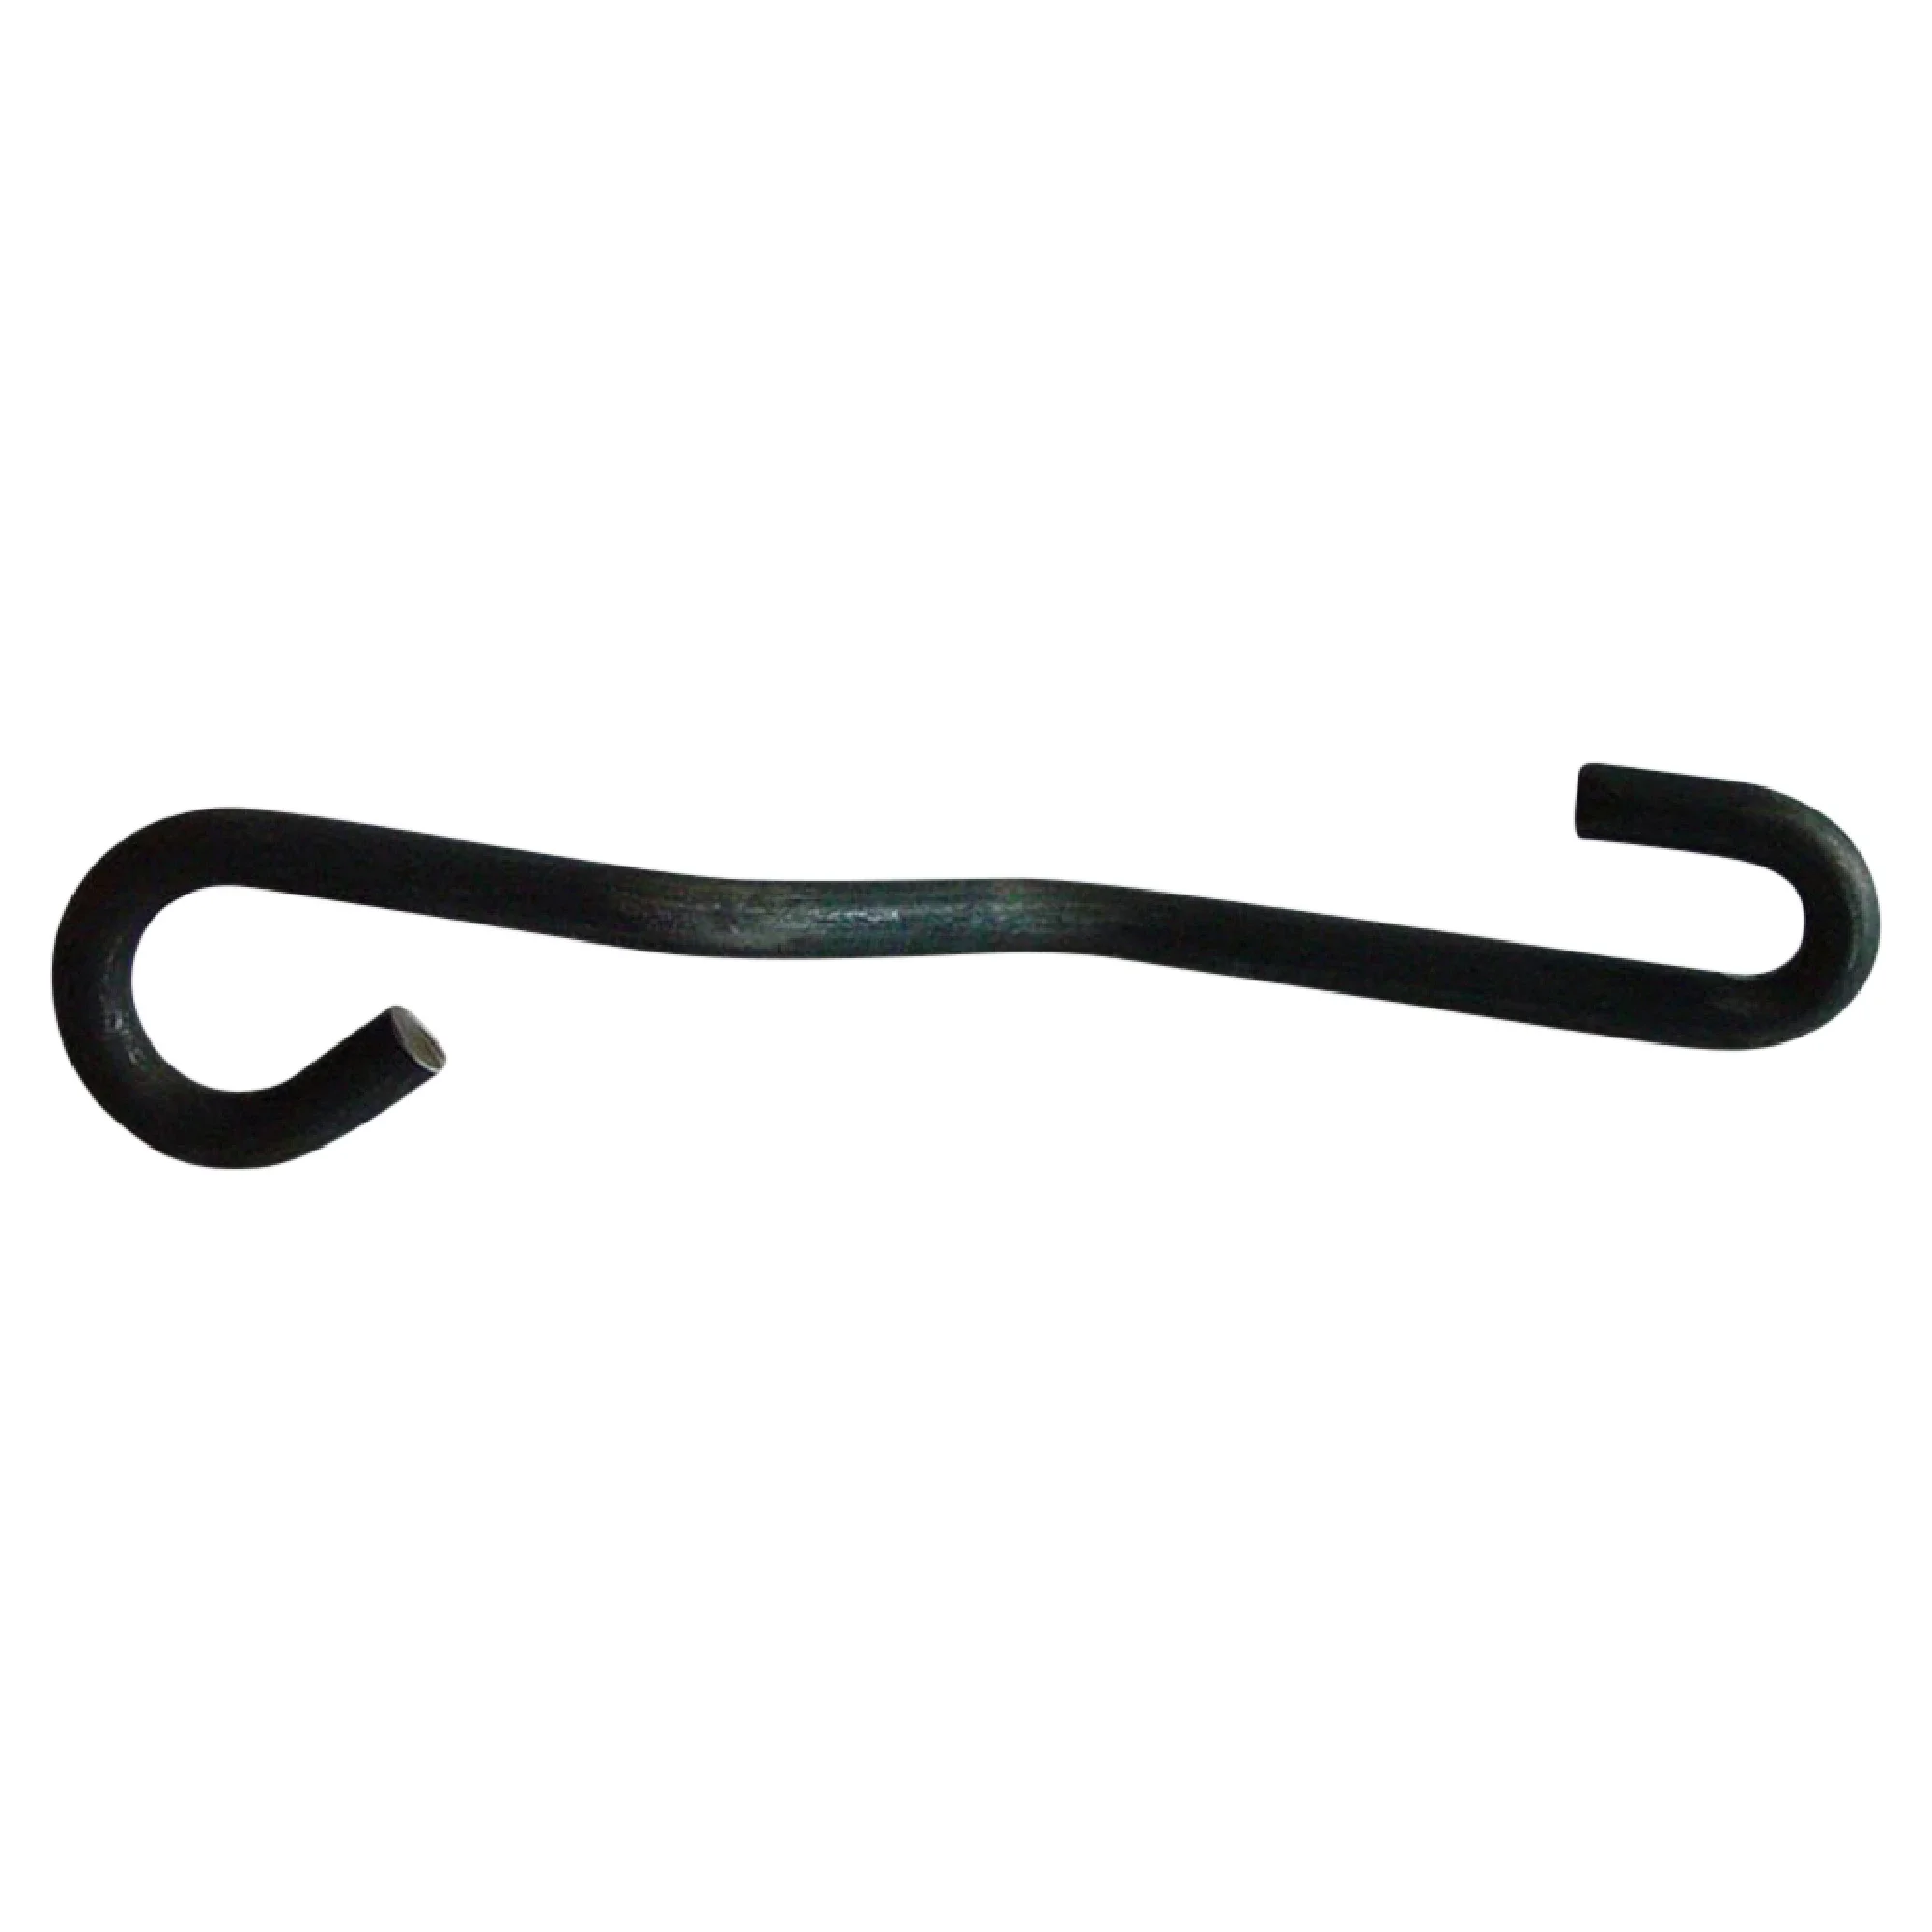 Wastebuilt® Replacement for Heil Hook, Spring, Grabber,. Right Hand